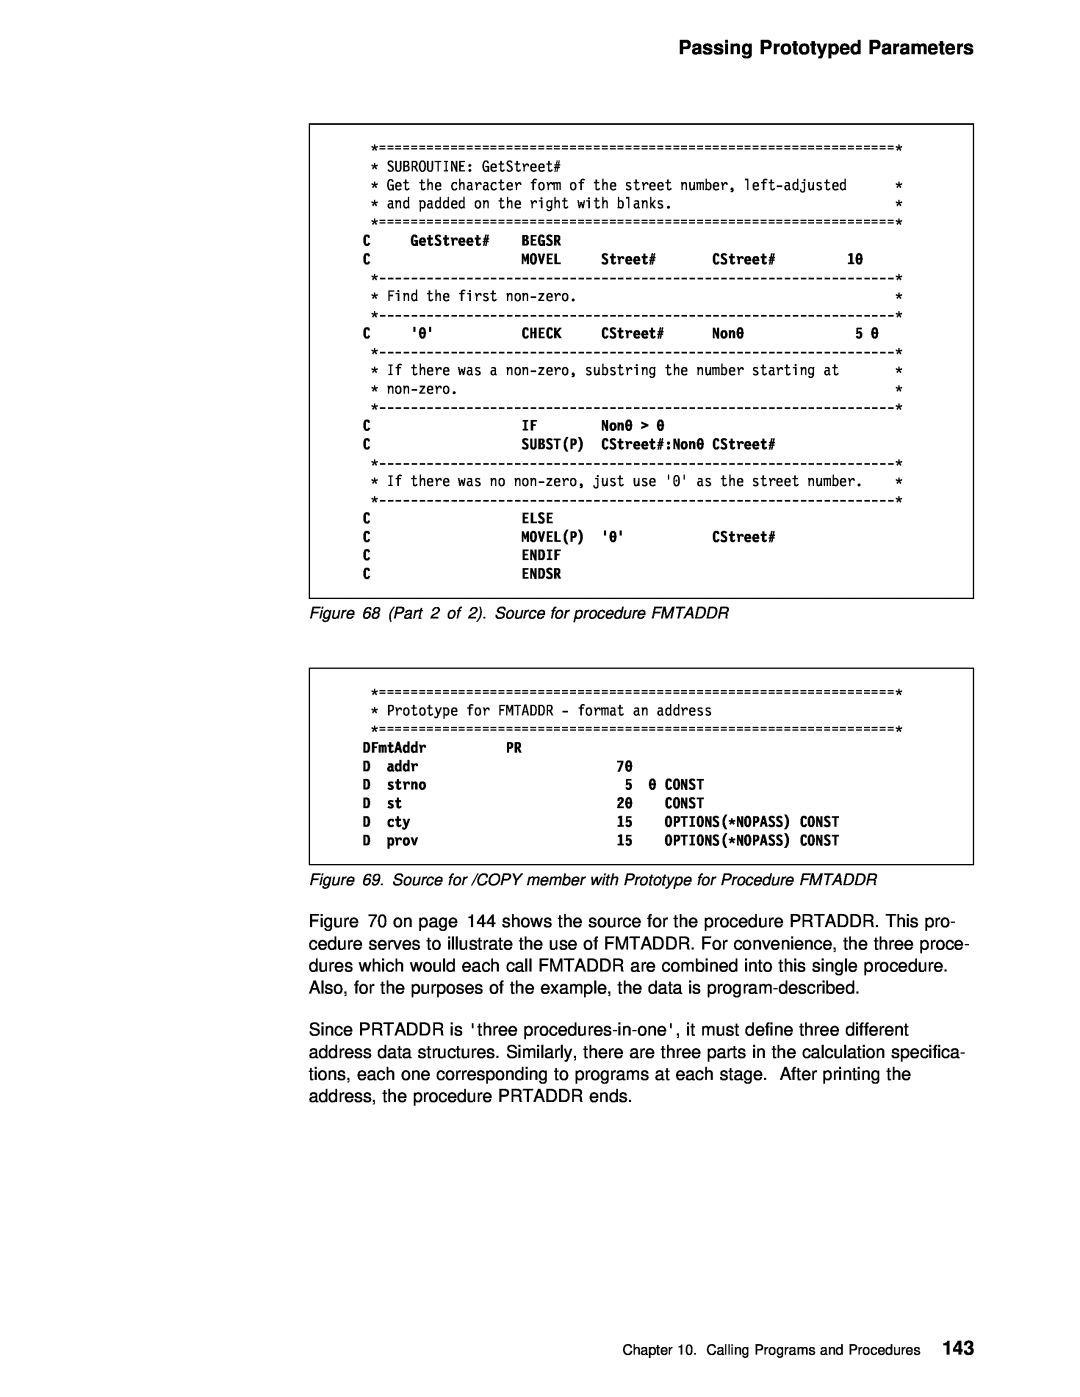 IBM AS/400 manual Passing Prototyped Parameters, Part 2 of 2. Source for procedure FMTADDR 